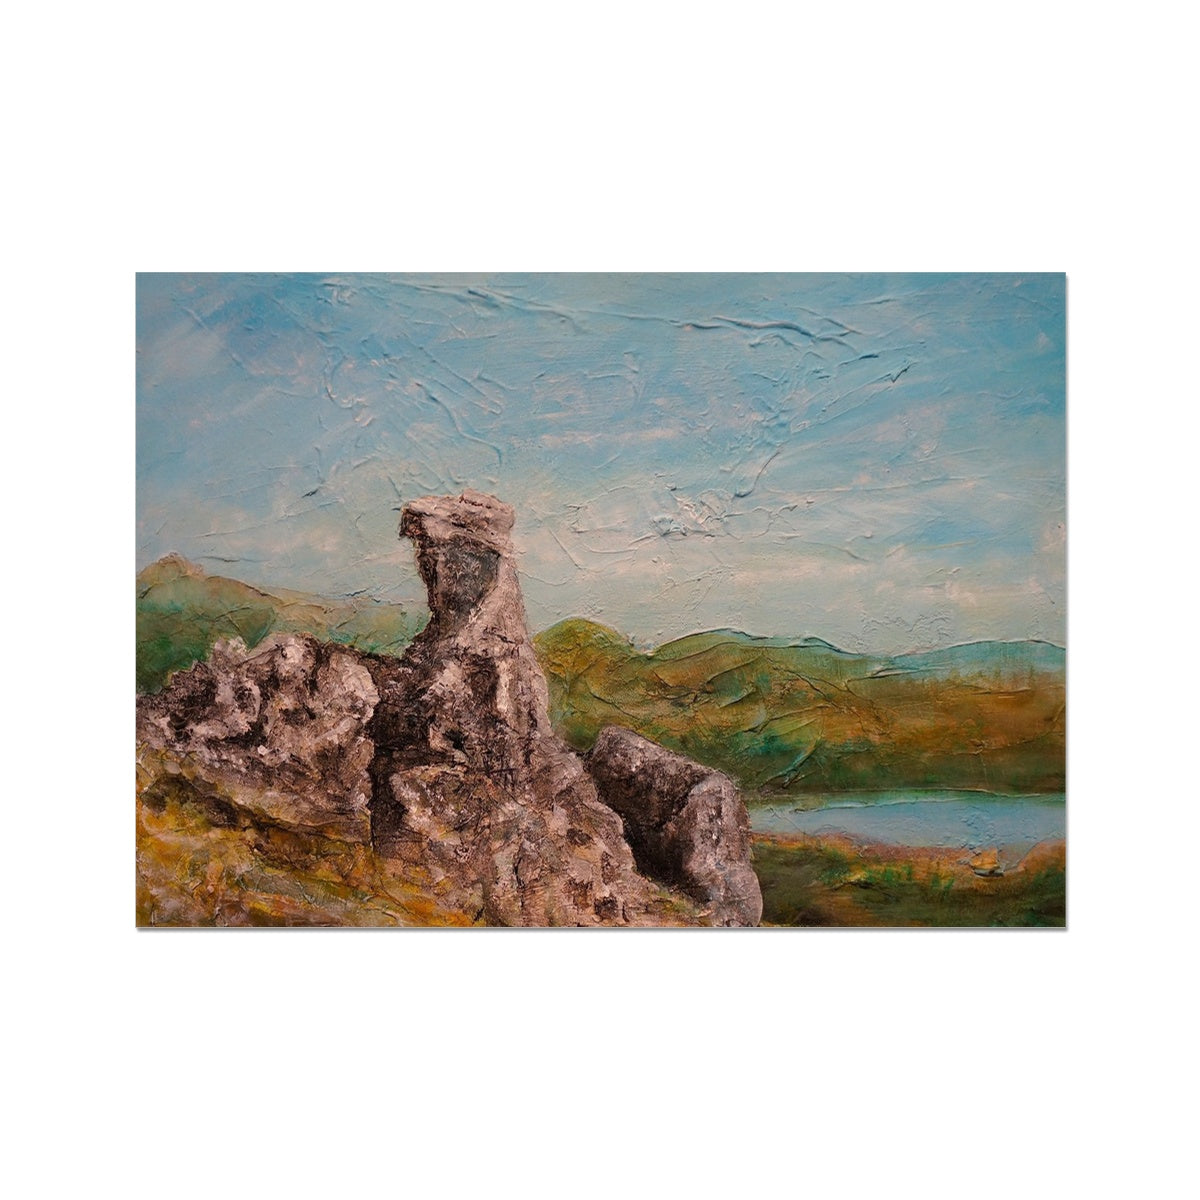 The Cobbler ii Painting | Fine Art Prints From Scotland-Unframed Prints-Scottish Lochs & Mountains Art Gallery-A2 Landscape-Paintings, Prints, Homeware, Art Gifts From Scotland By Scottish Artist Kevin Hunter